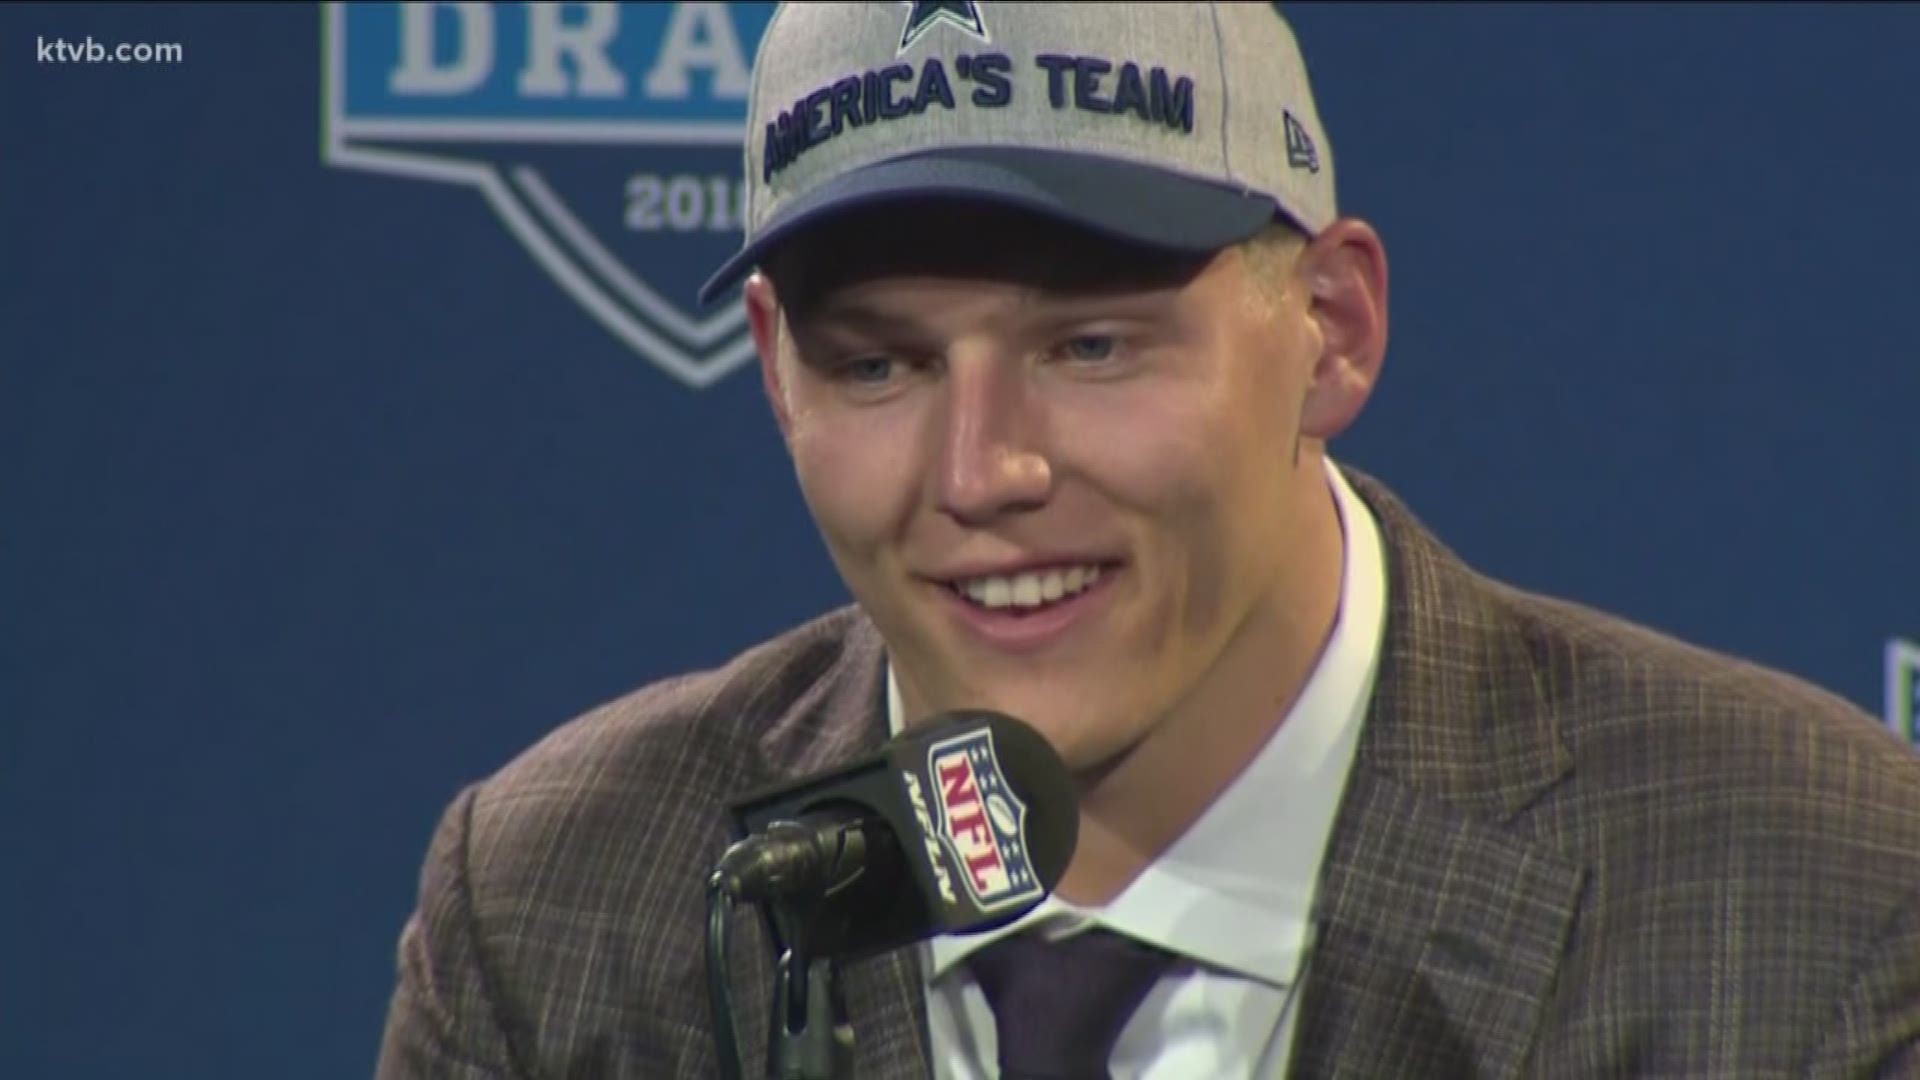 During a press conference after the draft, Leighton talked about joining "America's team" and former Boise State alums Demarcus Lawrence and Tyrone Crawford.